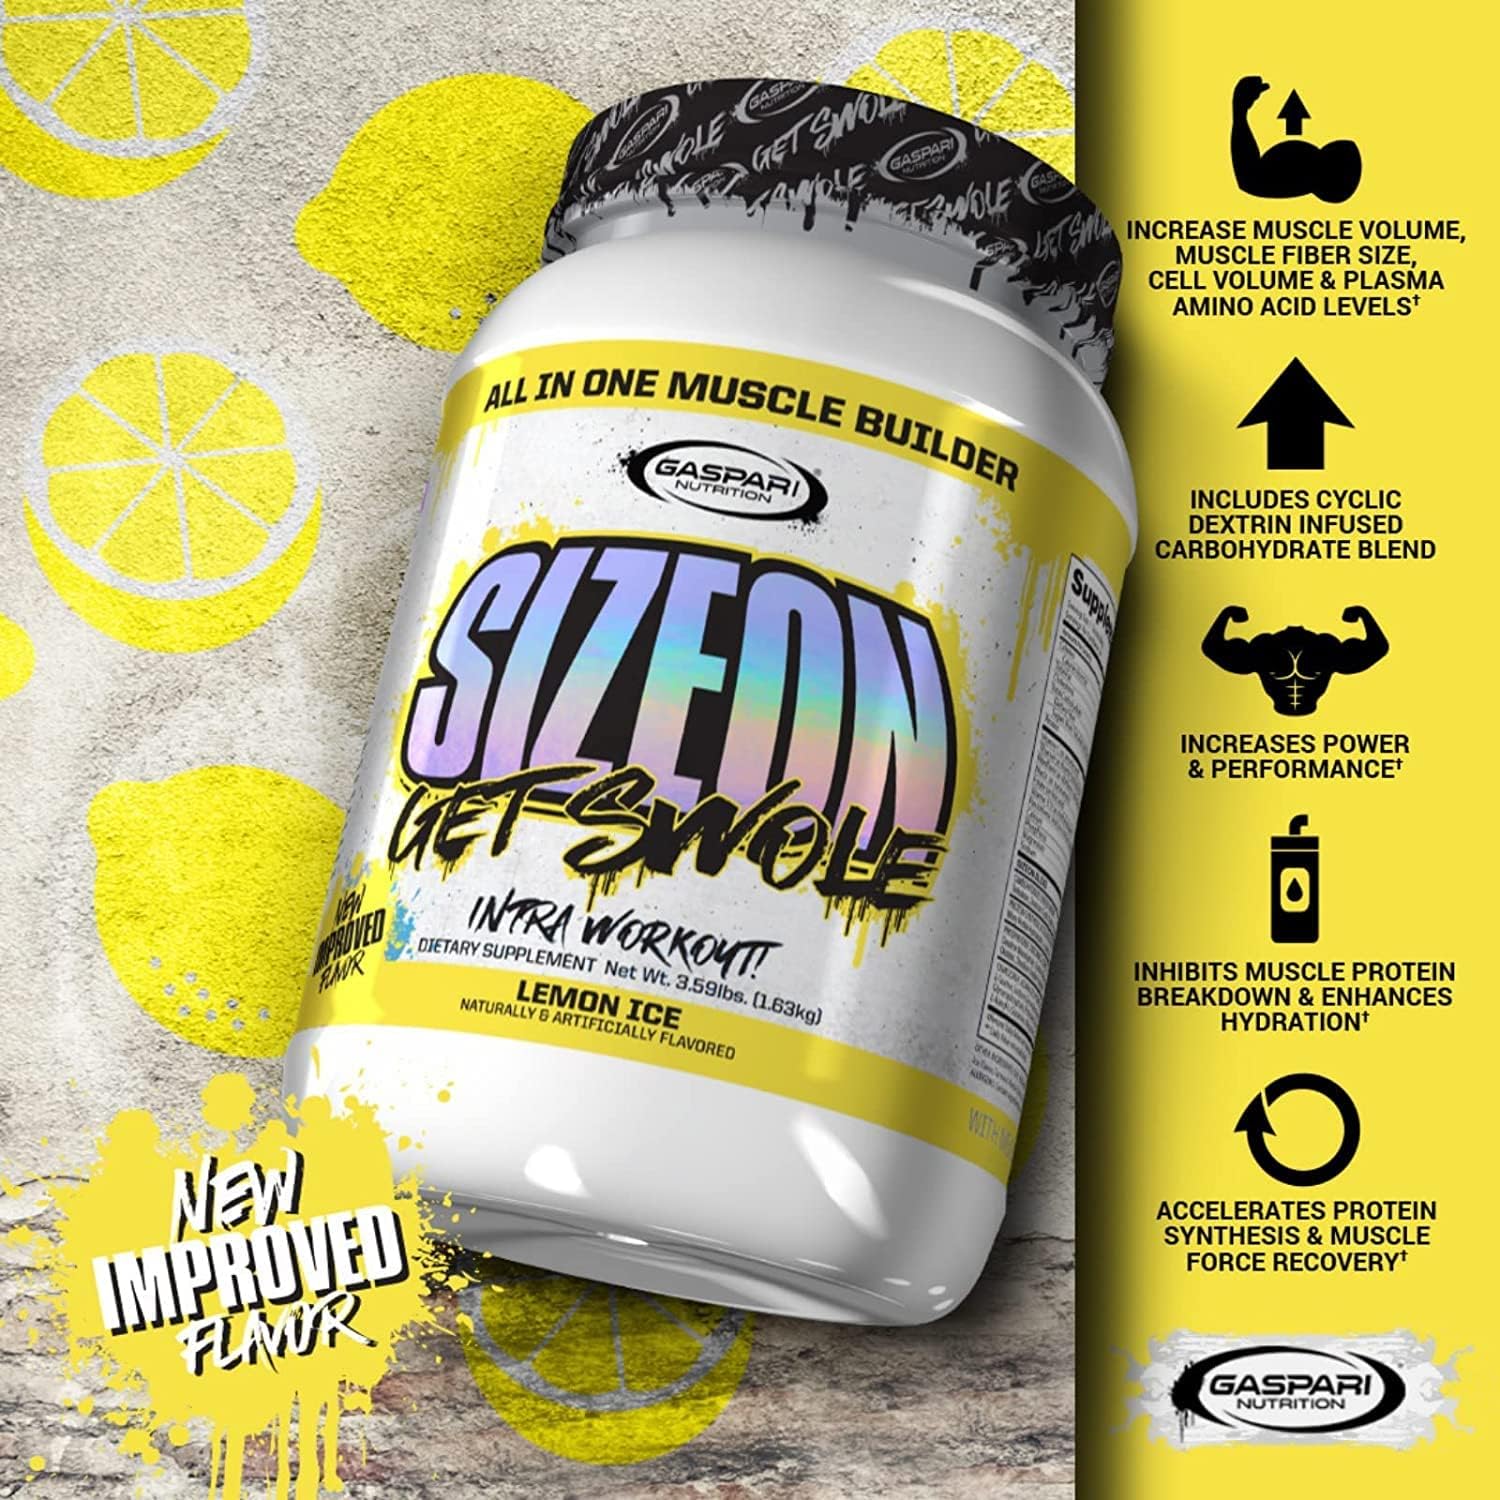 Gaspari Nutrition - SizeOn - The Ultimate Hybrid Intra-Workout Amino A